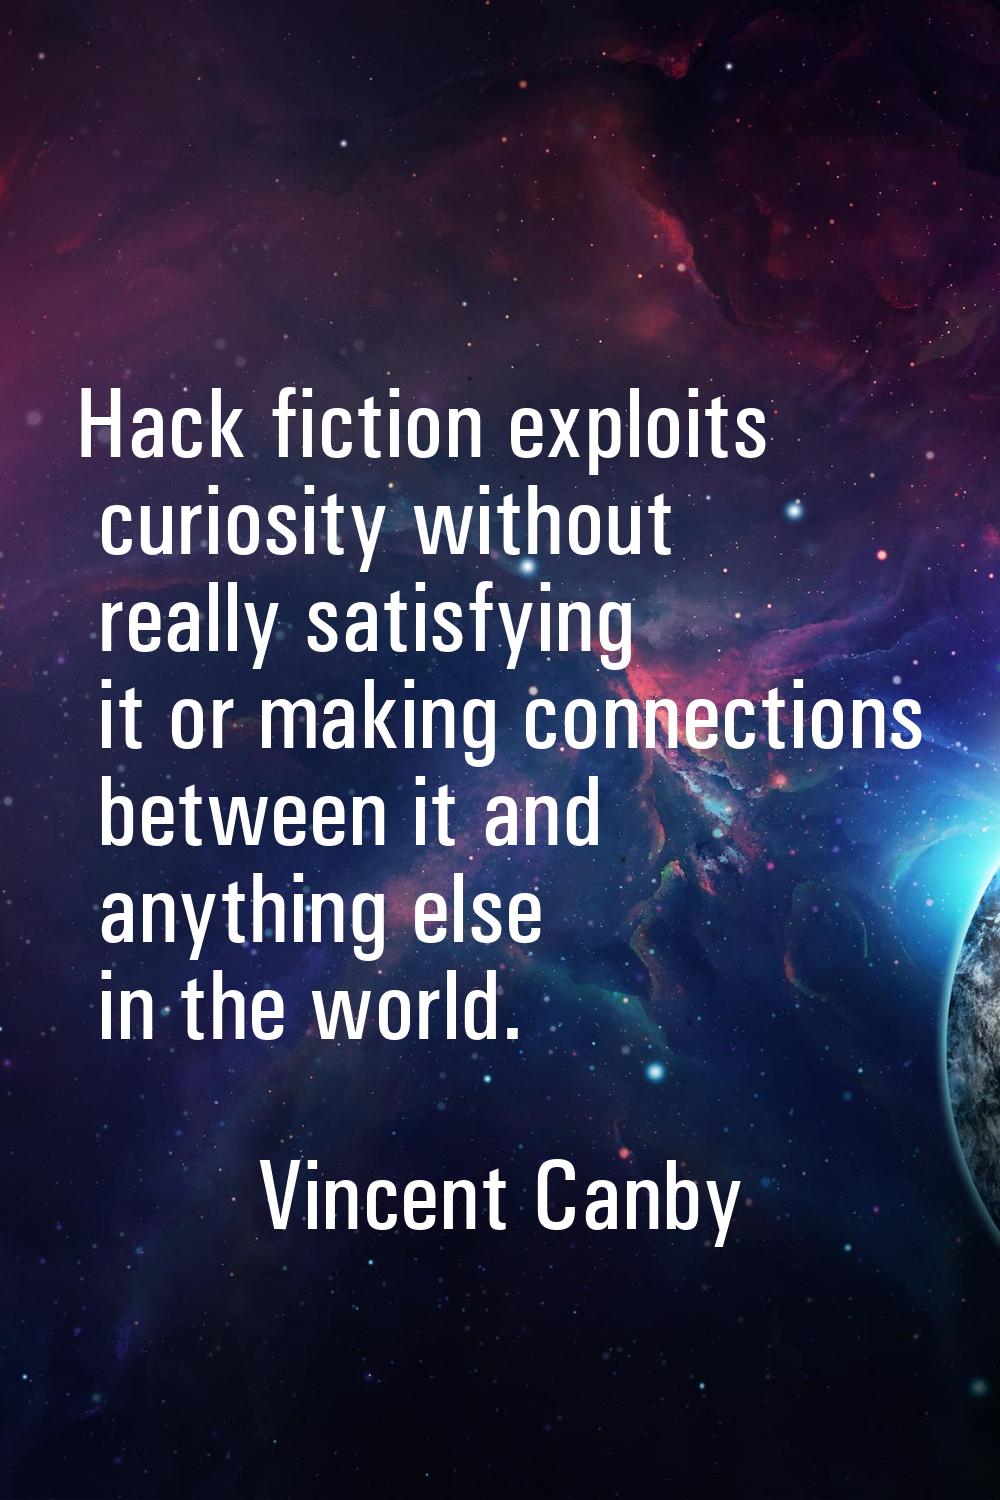 Hack fiction exploits curiosity without really satisfying it or making connections between it and a